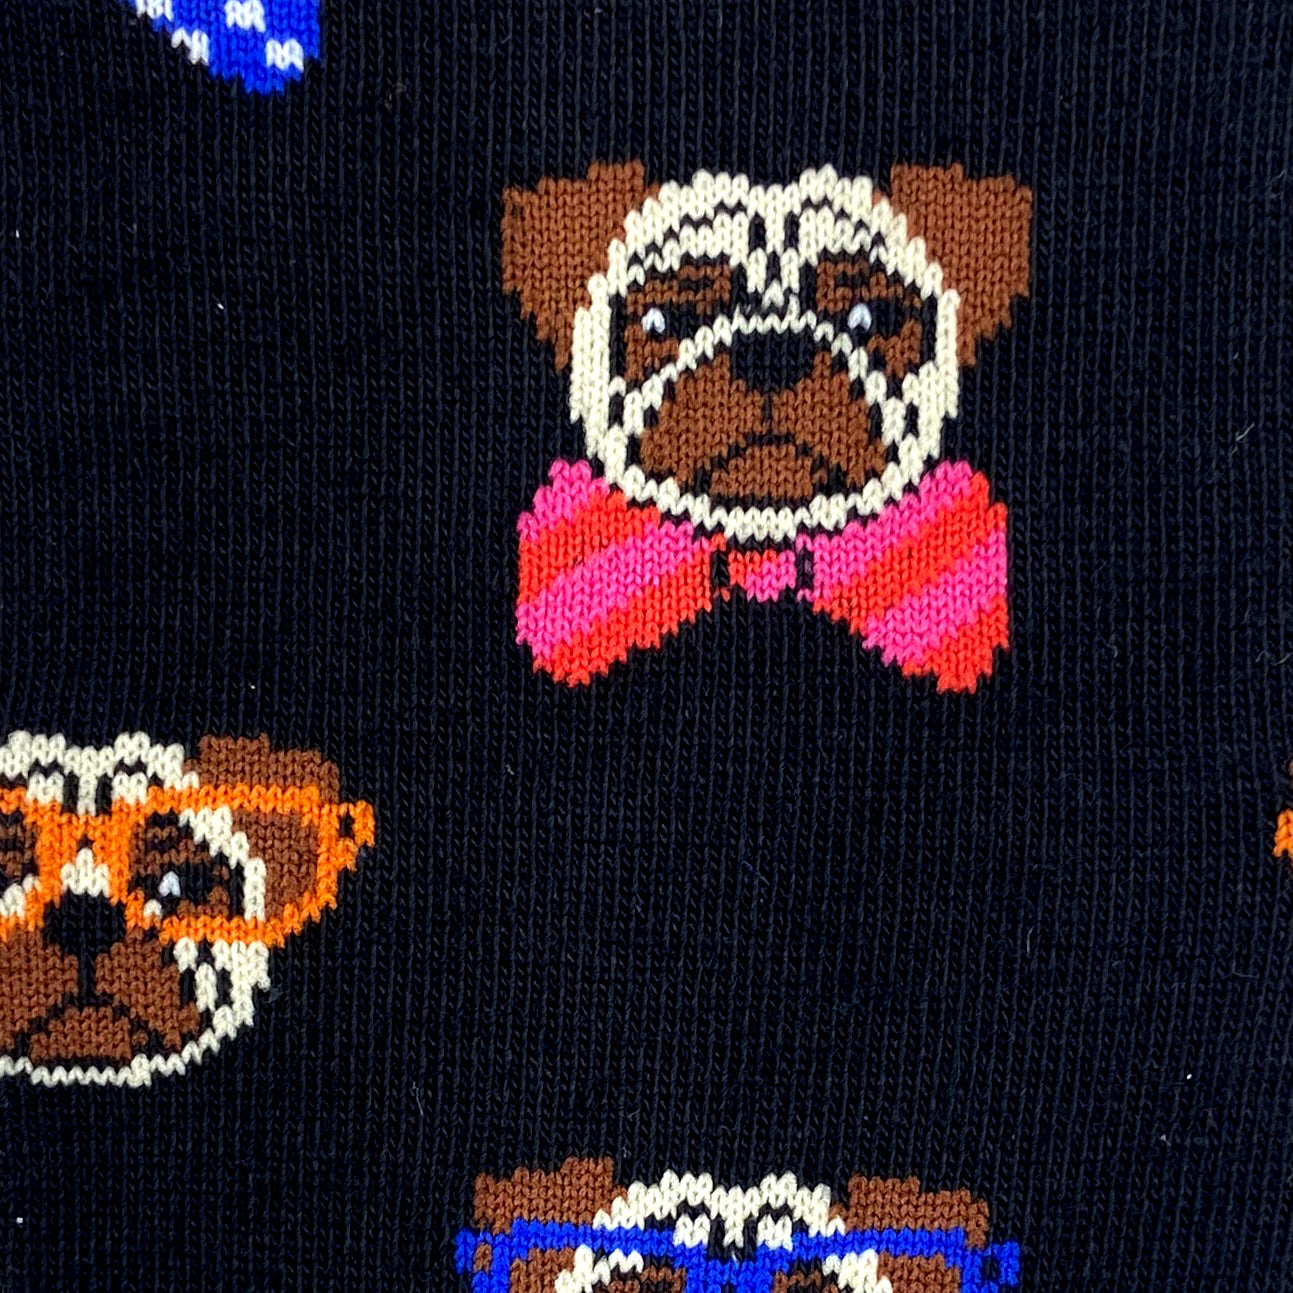 Adorable Pugs Wearing Bow Ties Patterned Dog Lover Novelty Dress Socks